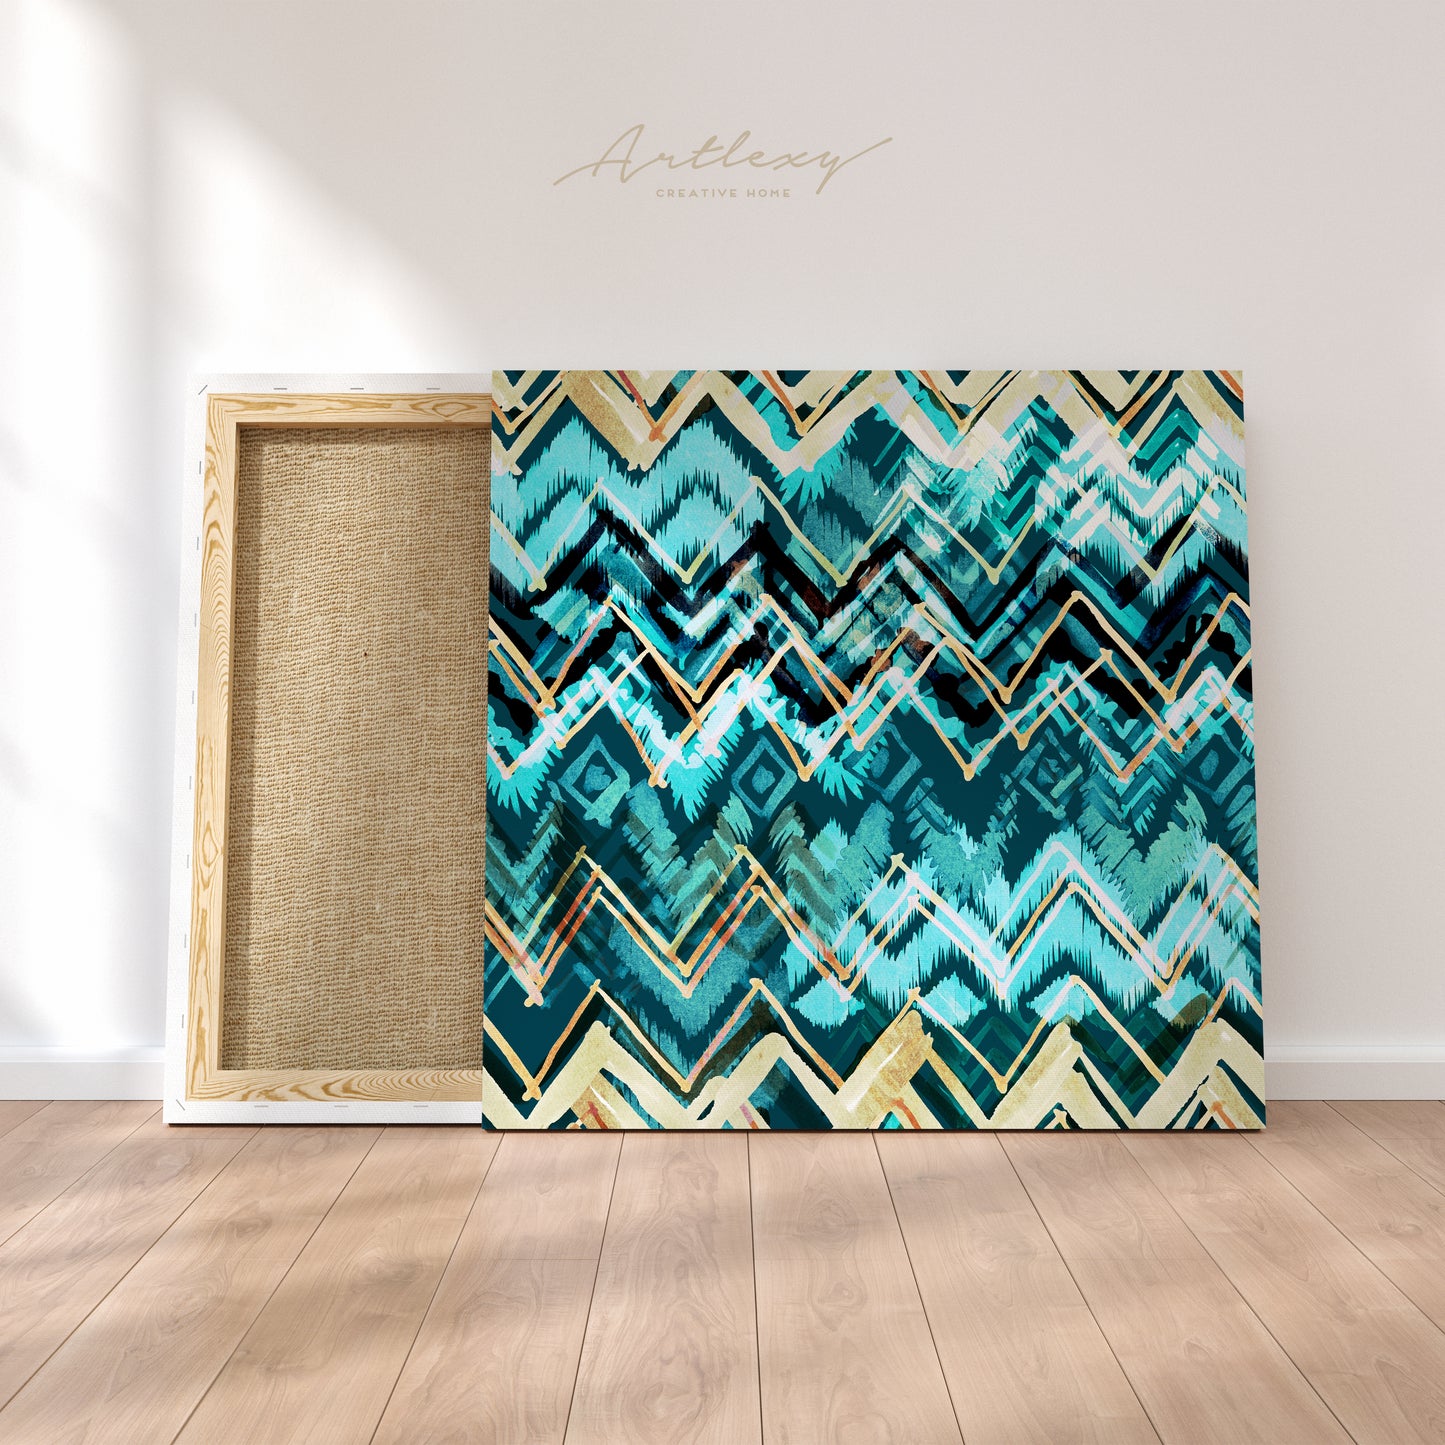 Tribal Ethnic Pattern Canvas Print ArtLexy 1 Panel 12"x12" inches 